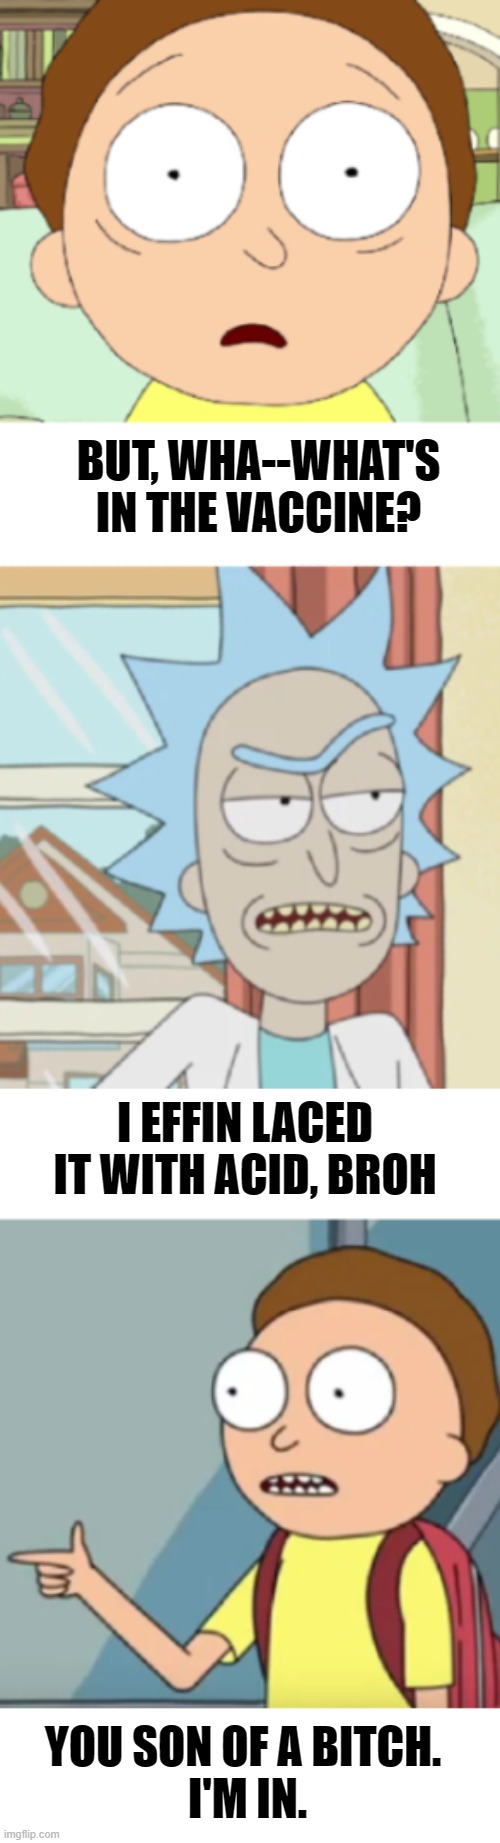 don't worry about it | BUT, WHA--WHAT'S IN THE VACCINE? I EFFIN LACED IT WITH ACID, BROH; YOU SON OF A BITCH. 

I'M IN. | image tagged in you son of a bitch i'm in,rick and morty,vaccine,antivax,worry,covid-19 | made w/ Imgflip meme maker